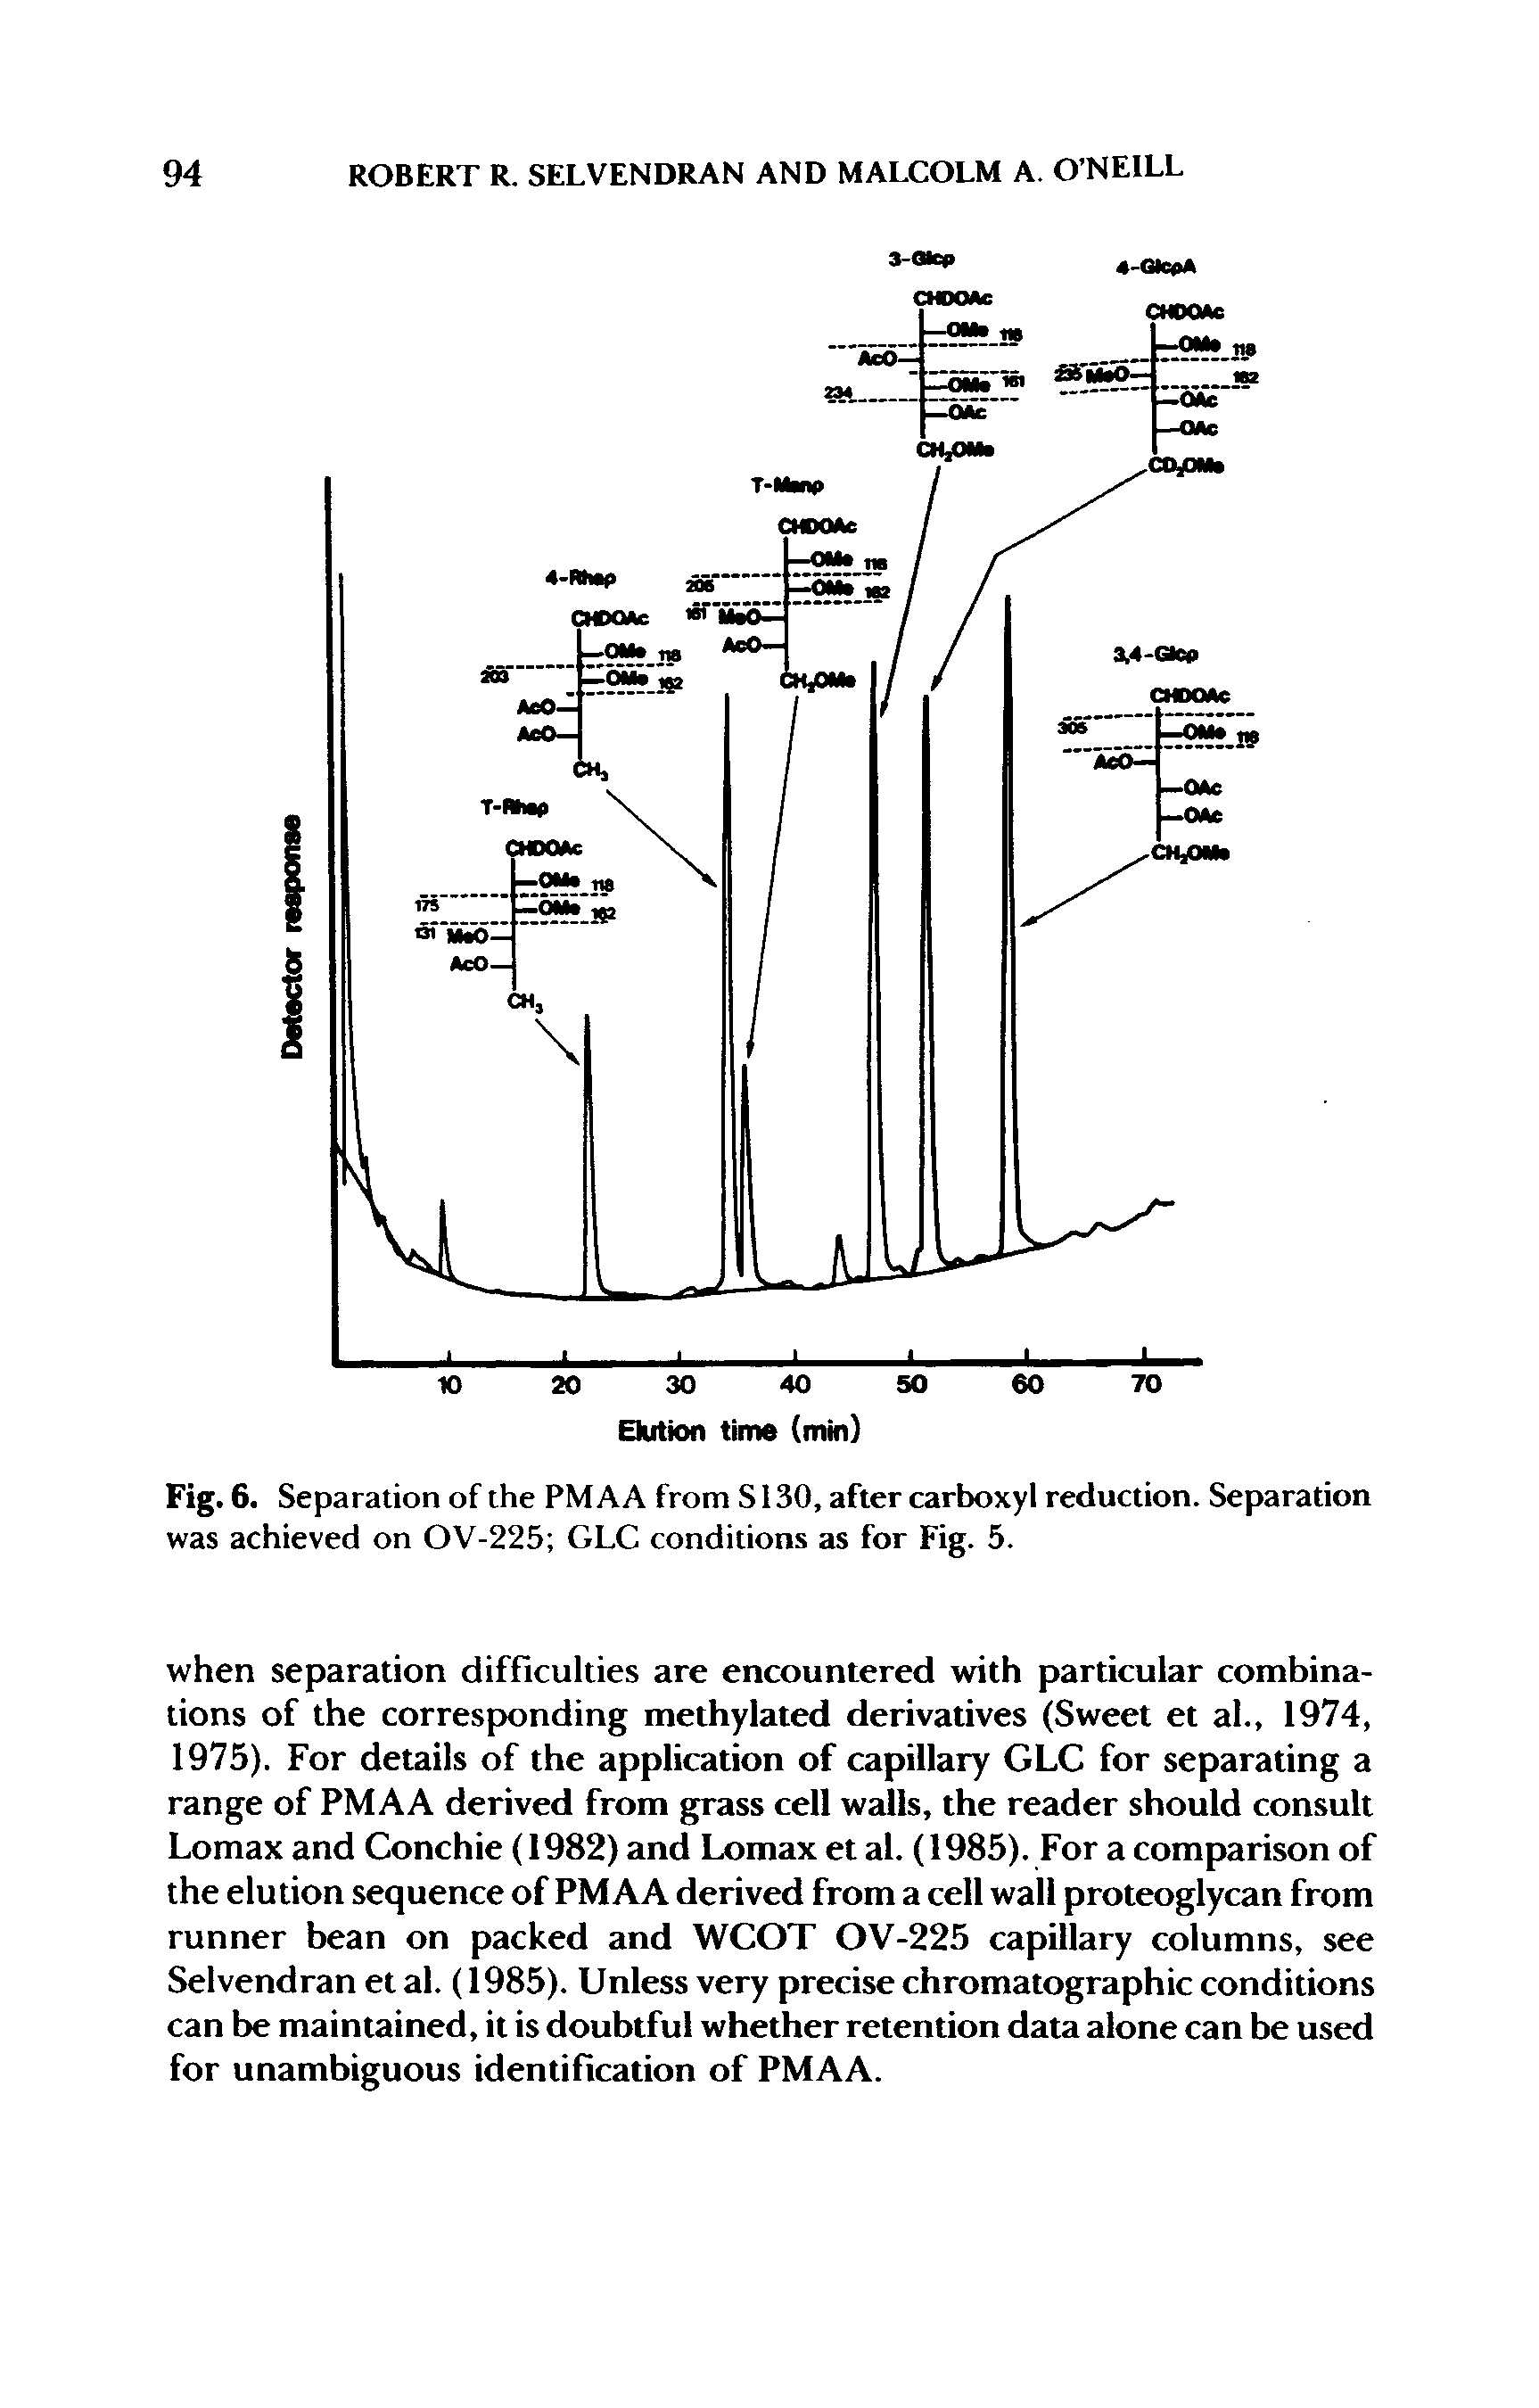 Fig. 6. Separation of the PM AA from S130, after carboxyl reduction. Separation was achieved on OV-225 GLC conditions as for Fig. 5.